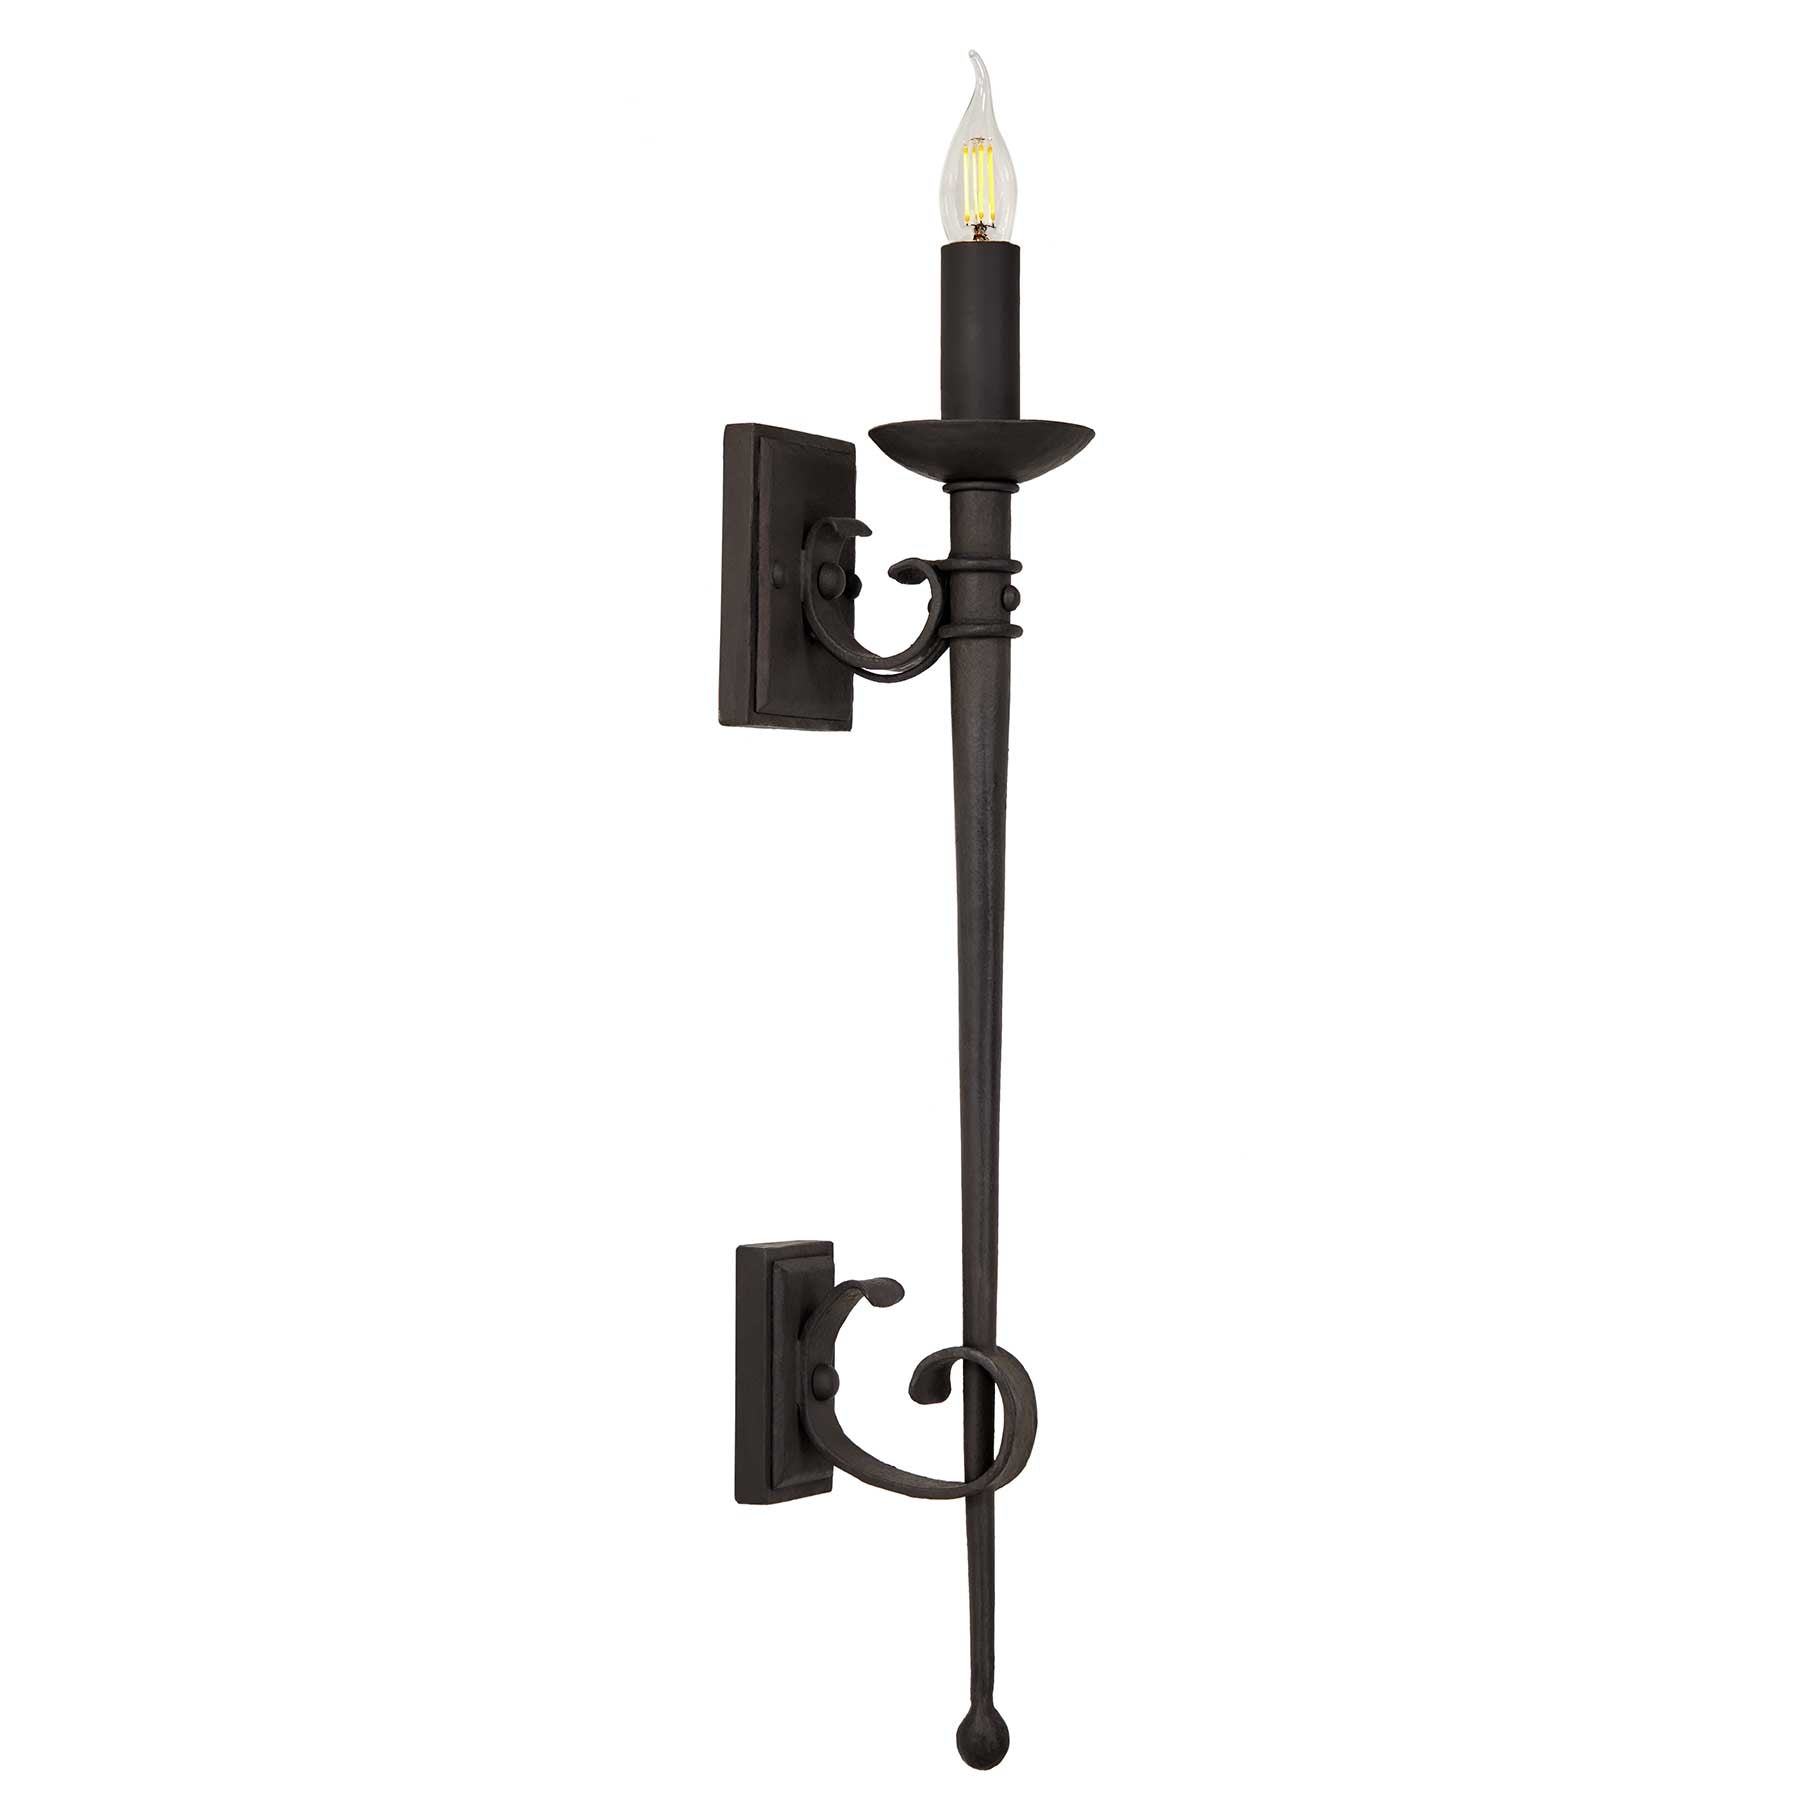 Traditional Torchiere by Santa Barbara Lighting Company heavy gauge steel exterior lighting wrought iron detail